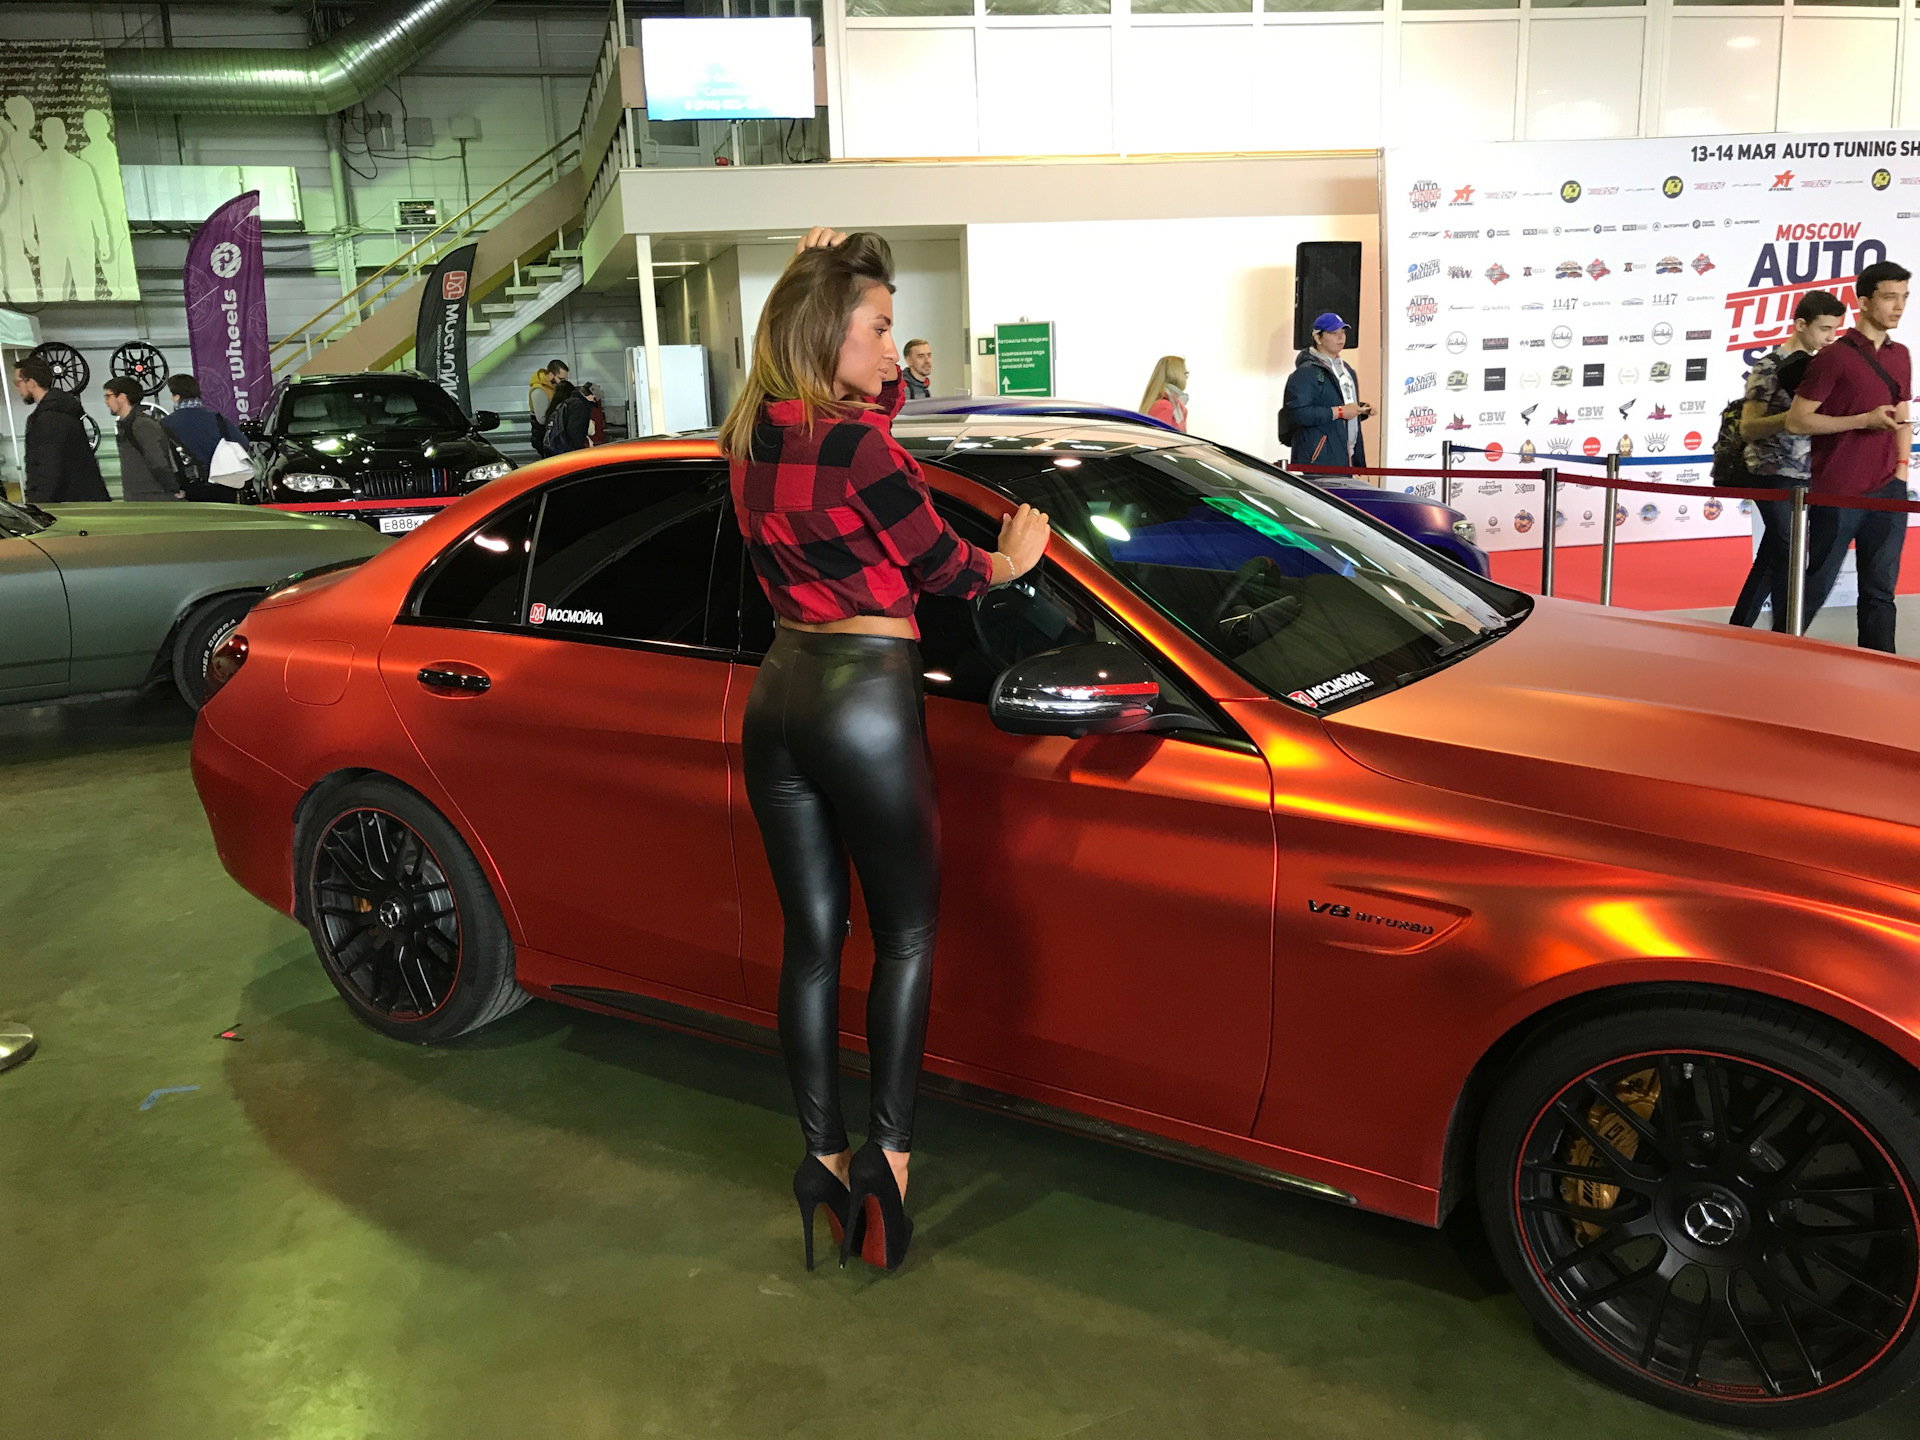 Tuning moscow. Moscow Tuning show. Moscow Tuning show 2018 машины. Auto Tuning show 2020. Moscow auto Tuning show.